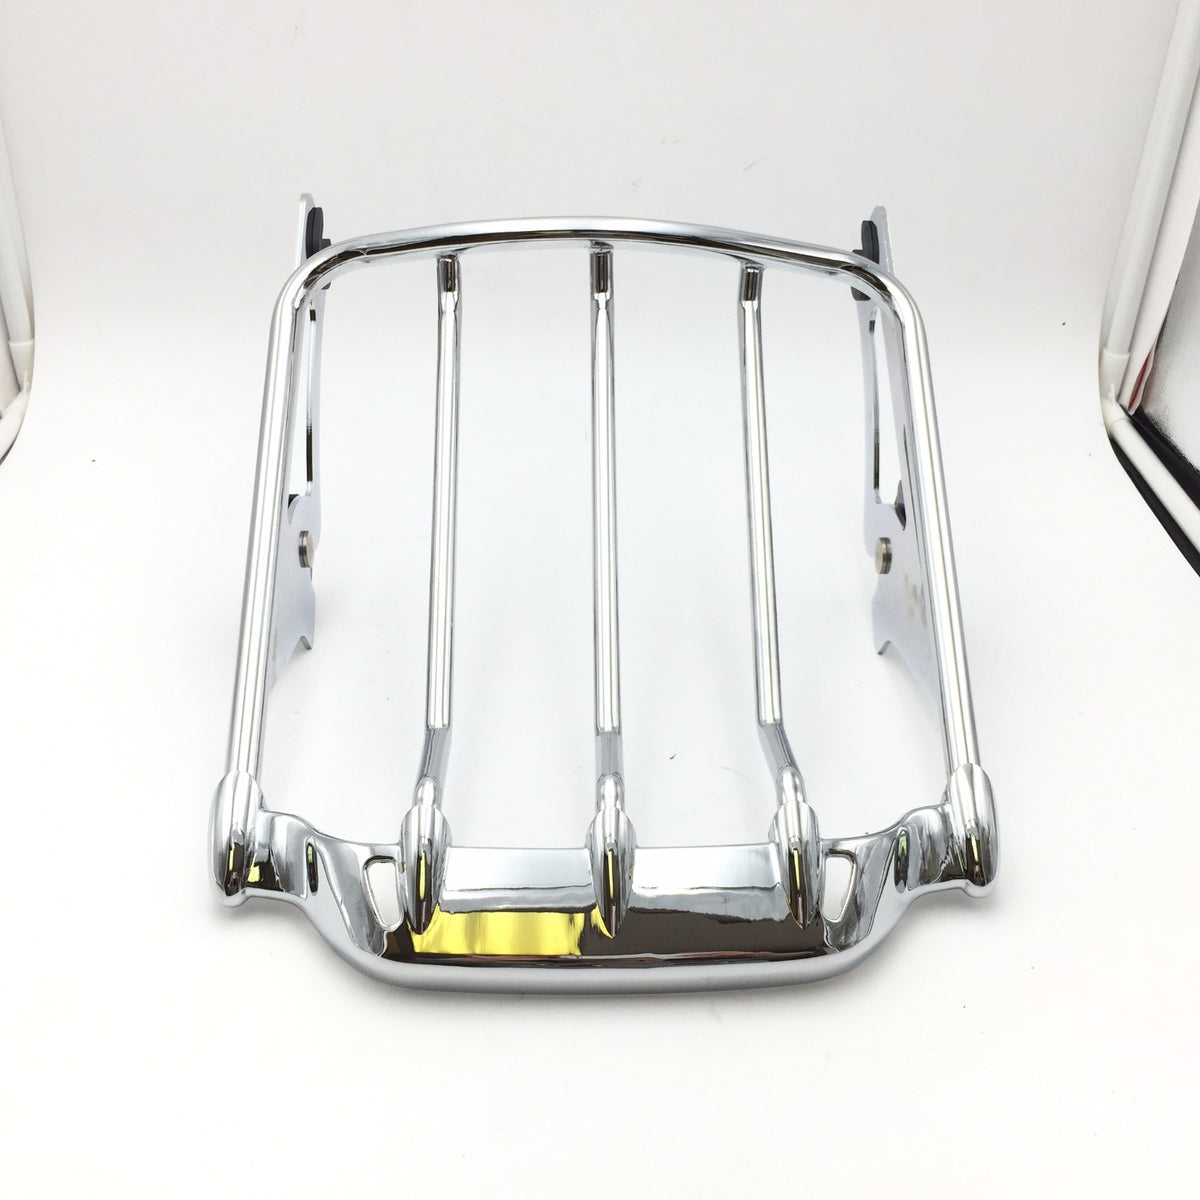 HTT Motorcycle Chrome Two-UP Air Wing Luggage Rack Mounting